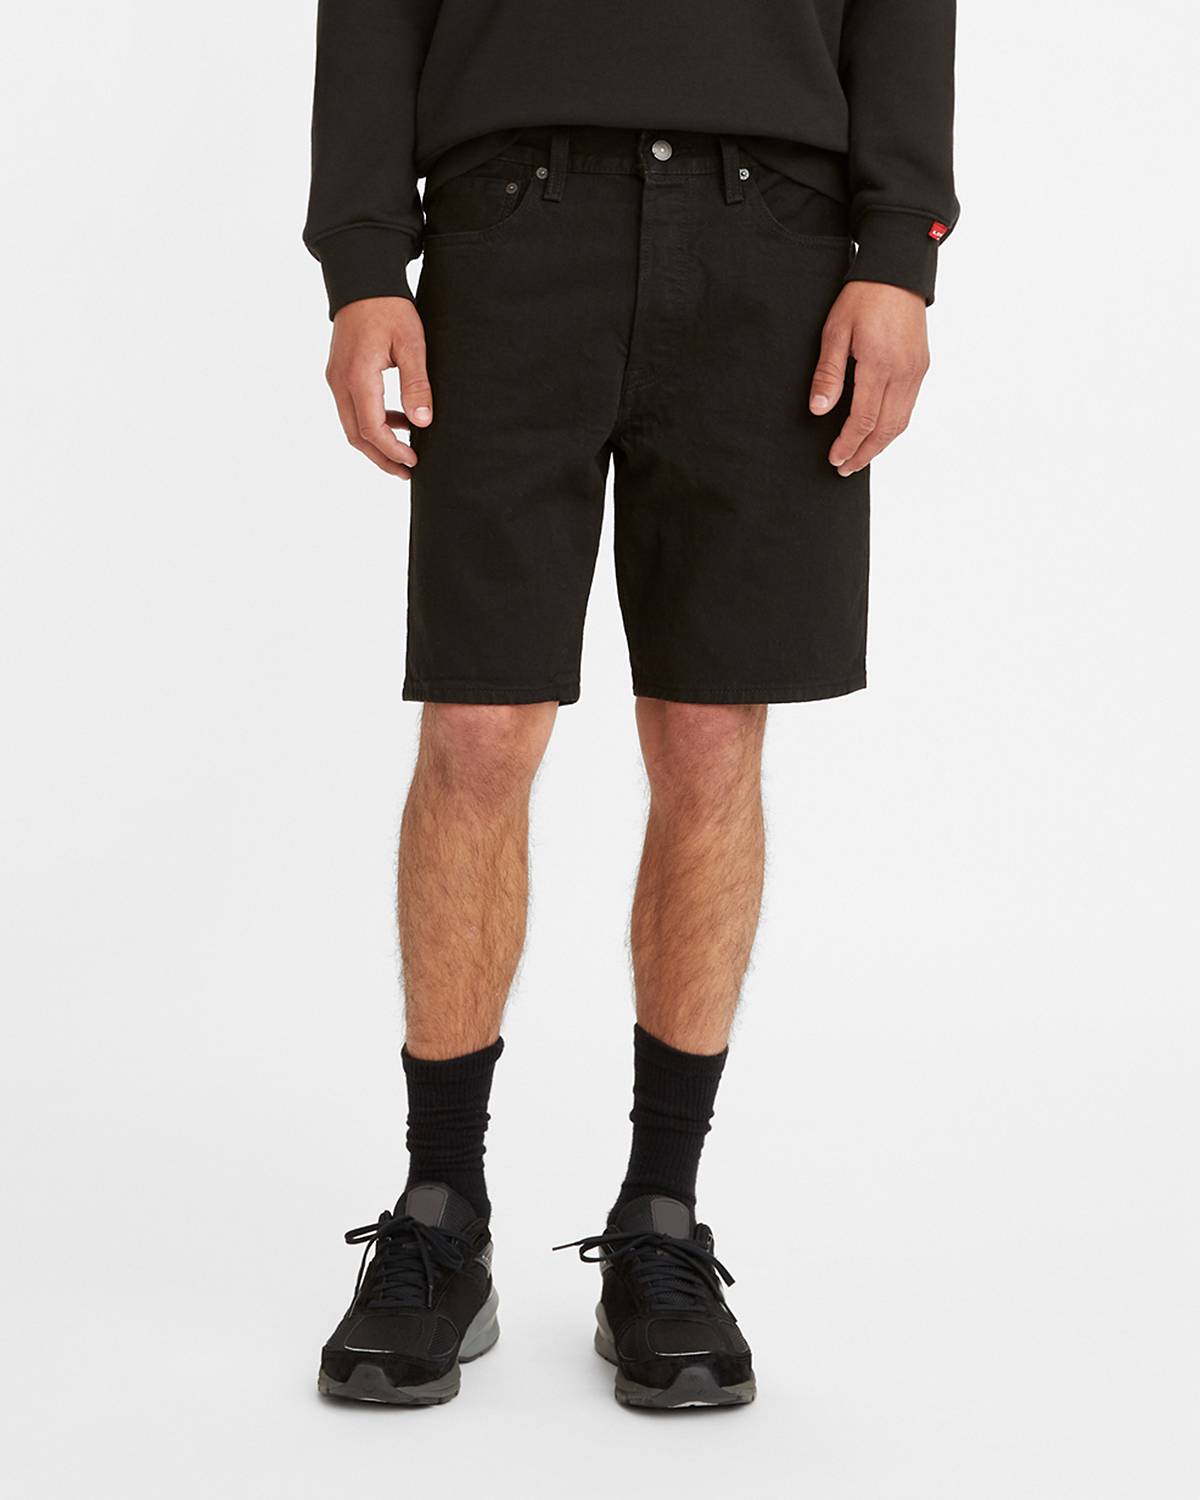 Model wearing black straight fit shorts